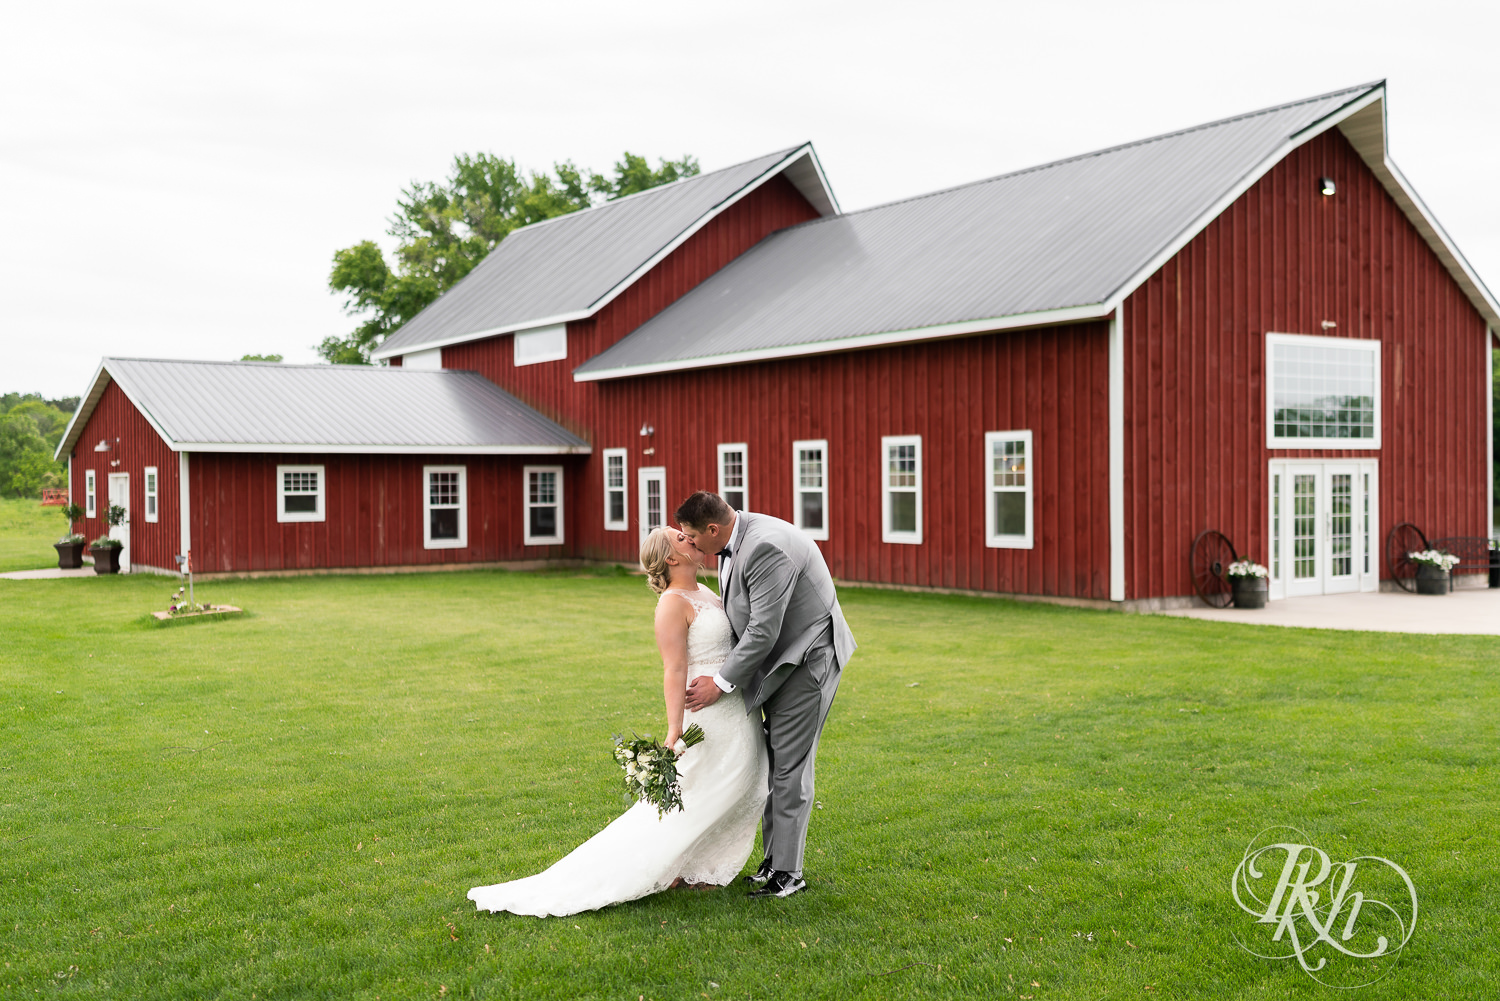 Bride and groom kiss in front of barn at Barn at Mirror Lake in Mondovi, Wisconsin.